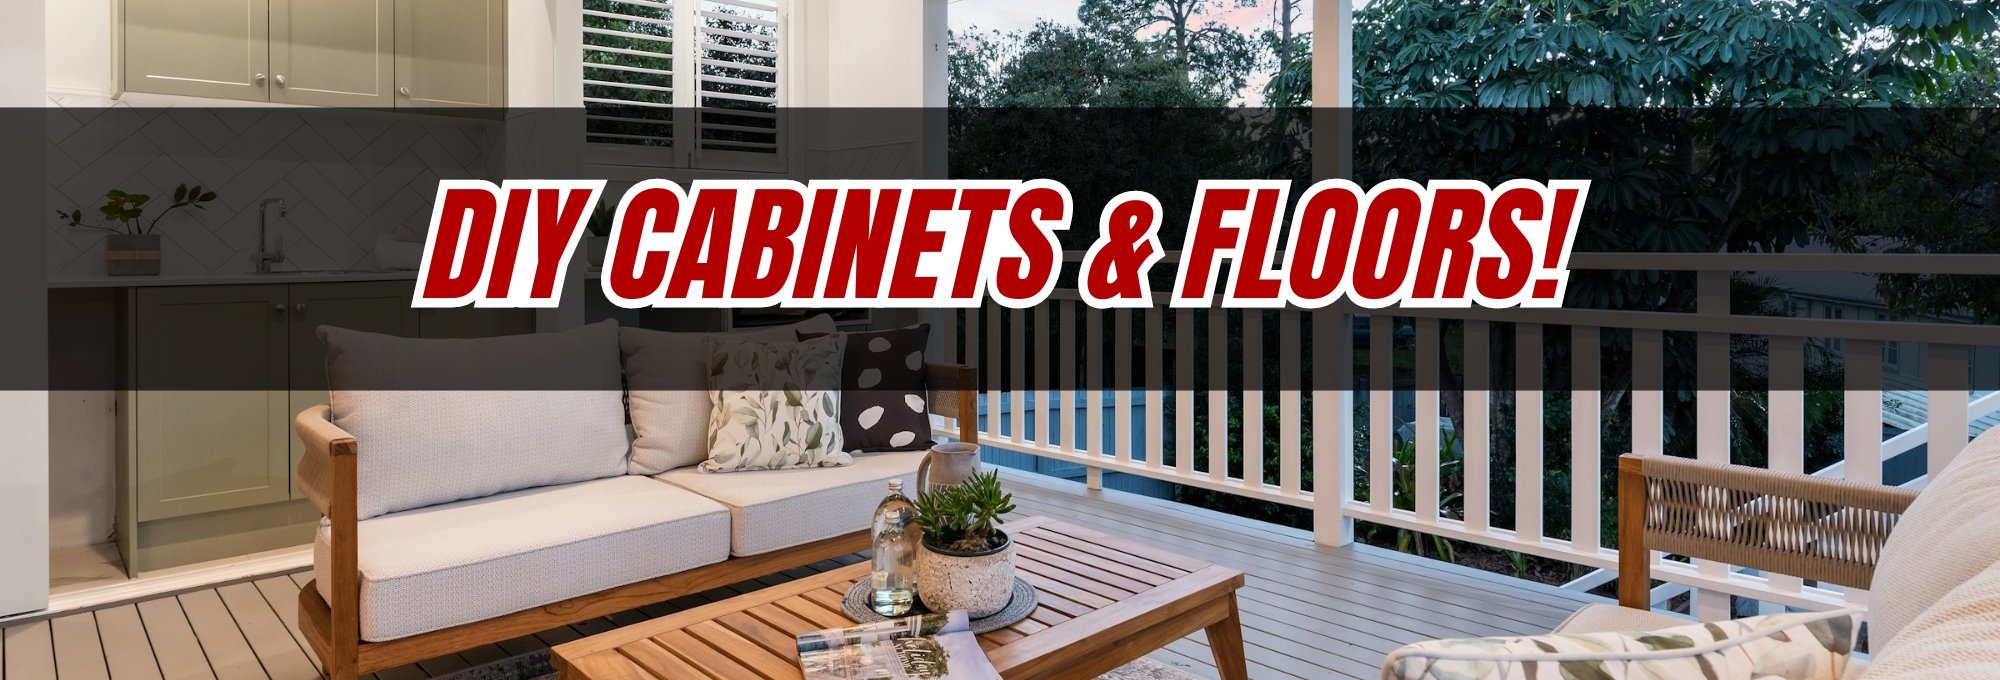 DIY Cabinets and Flooring servicing Lutz and Tampa, FL